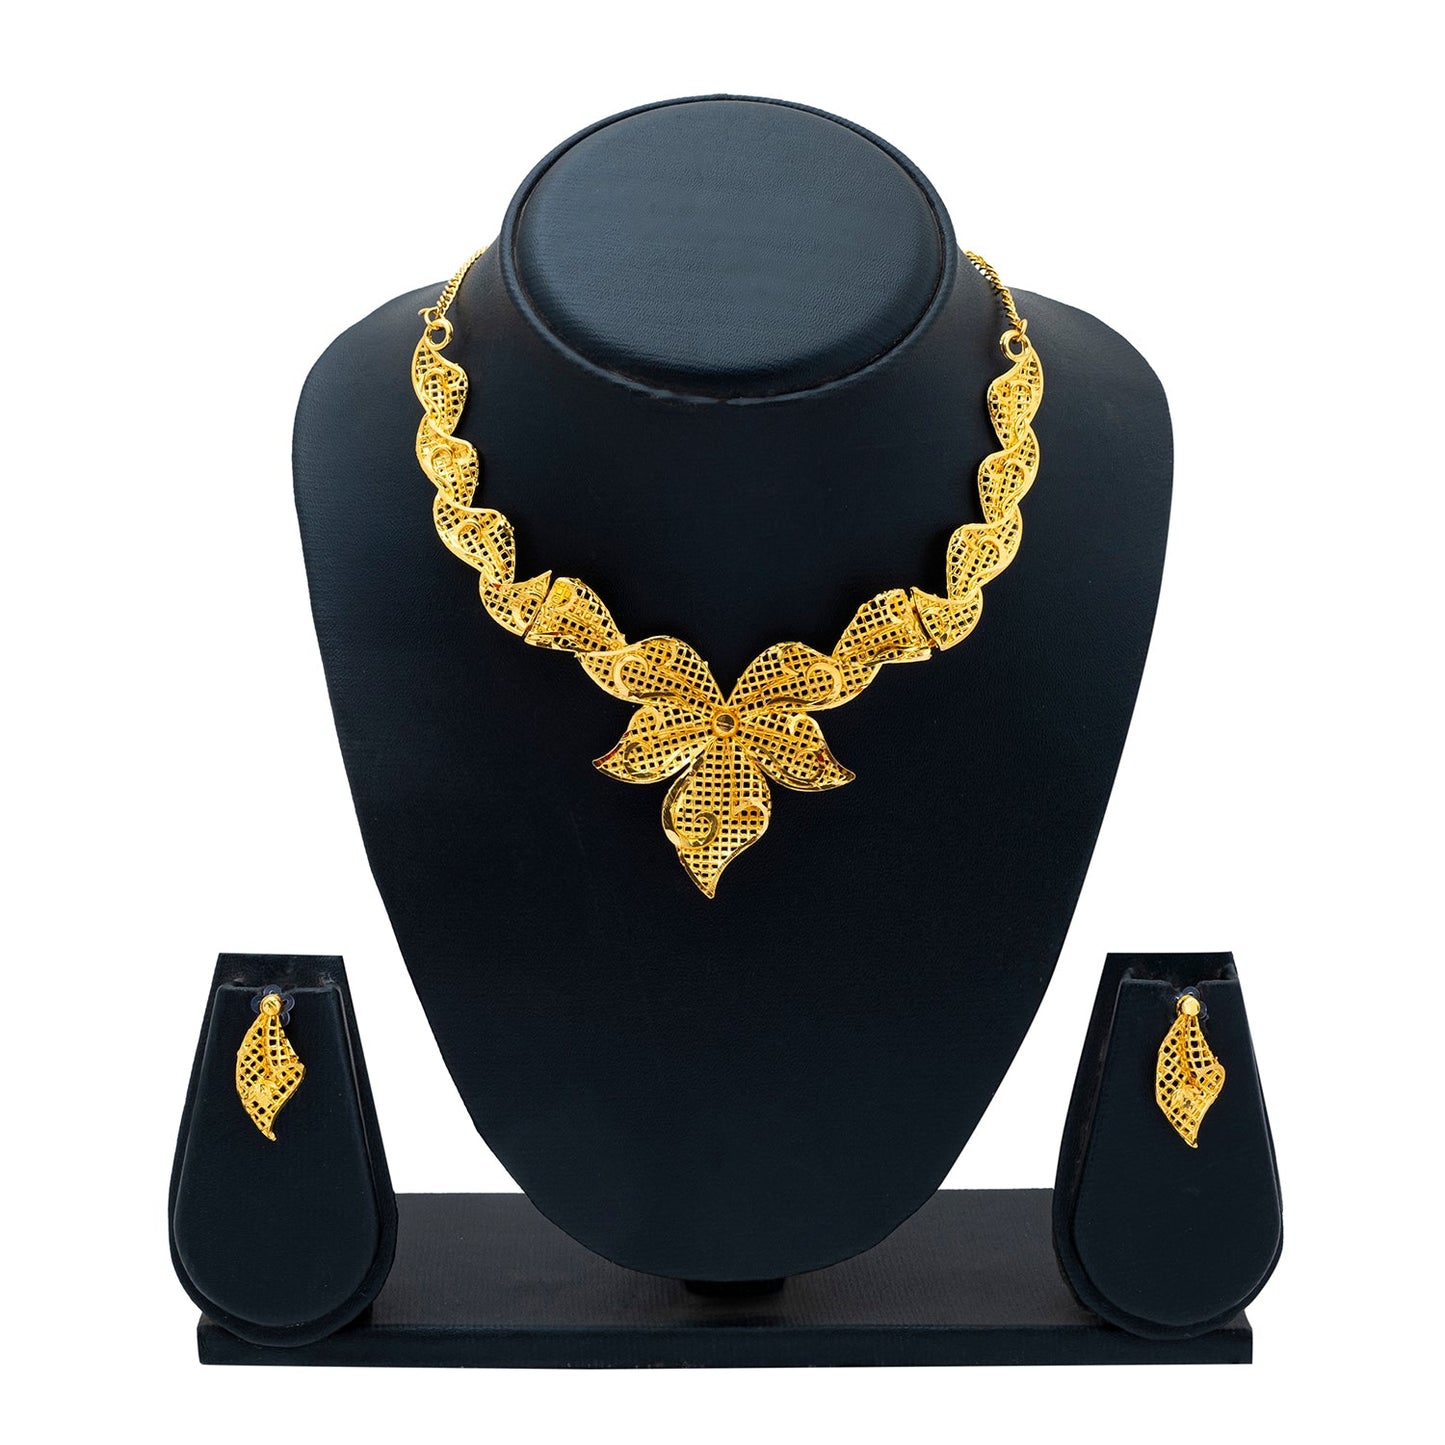 Shining Jewel Traditional Gold Plated Flower Design Necklace Chain Jewellery Set for Women (SJ_161)